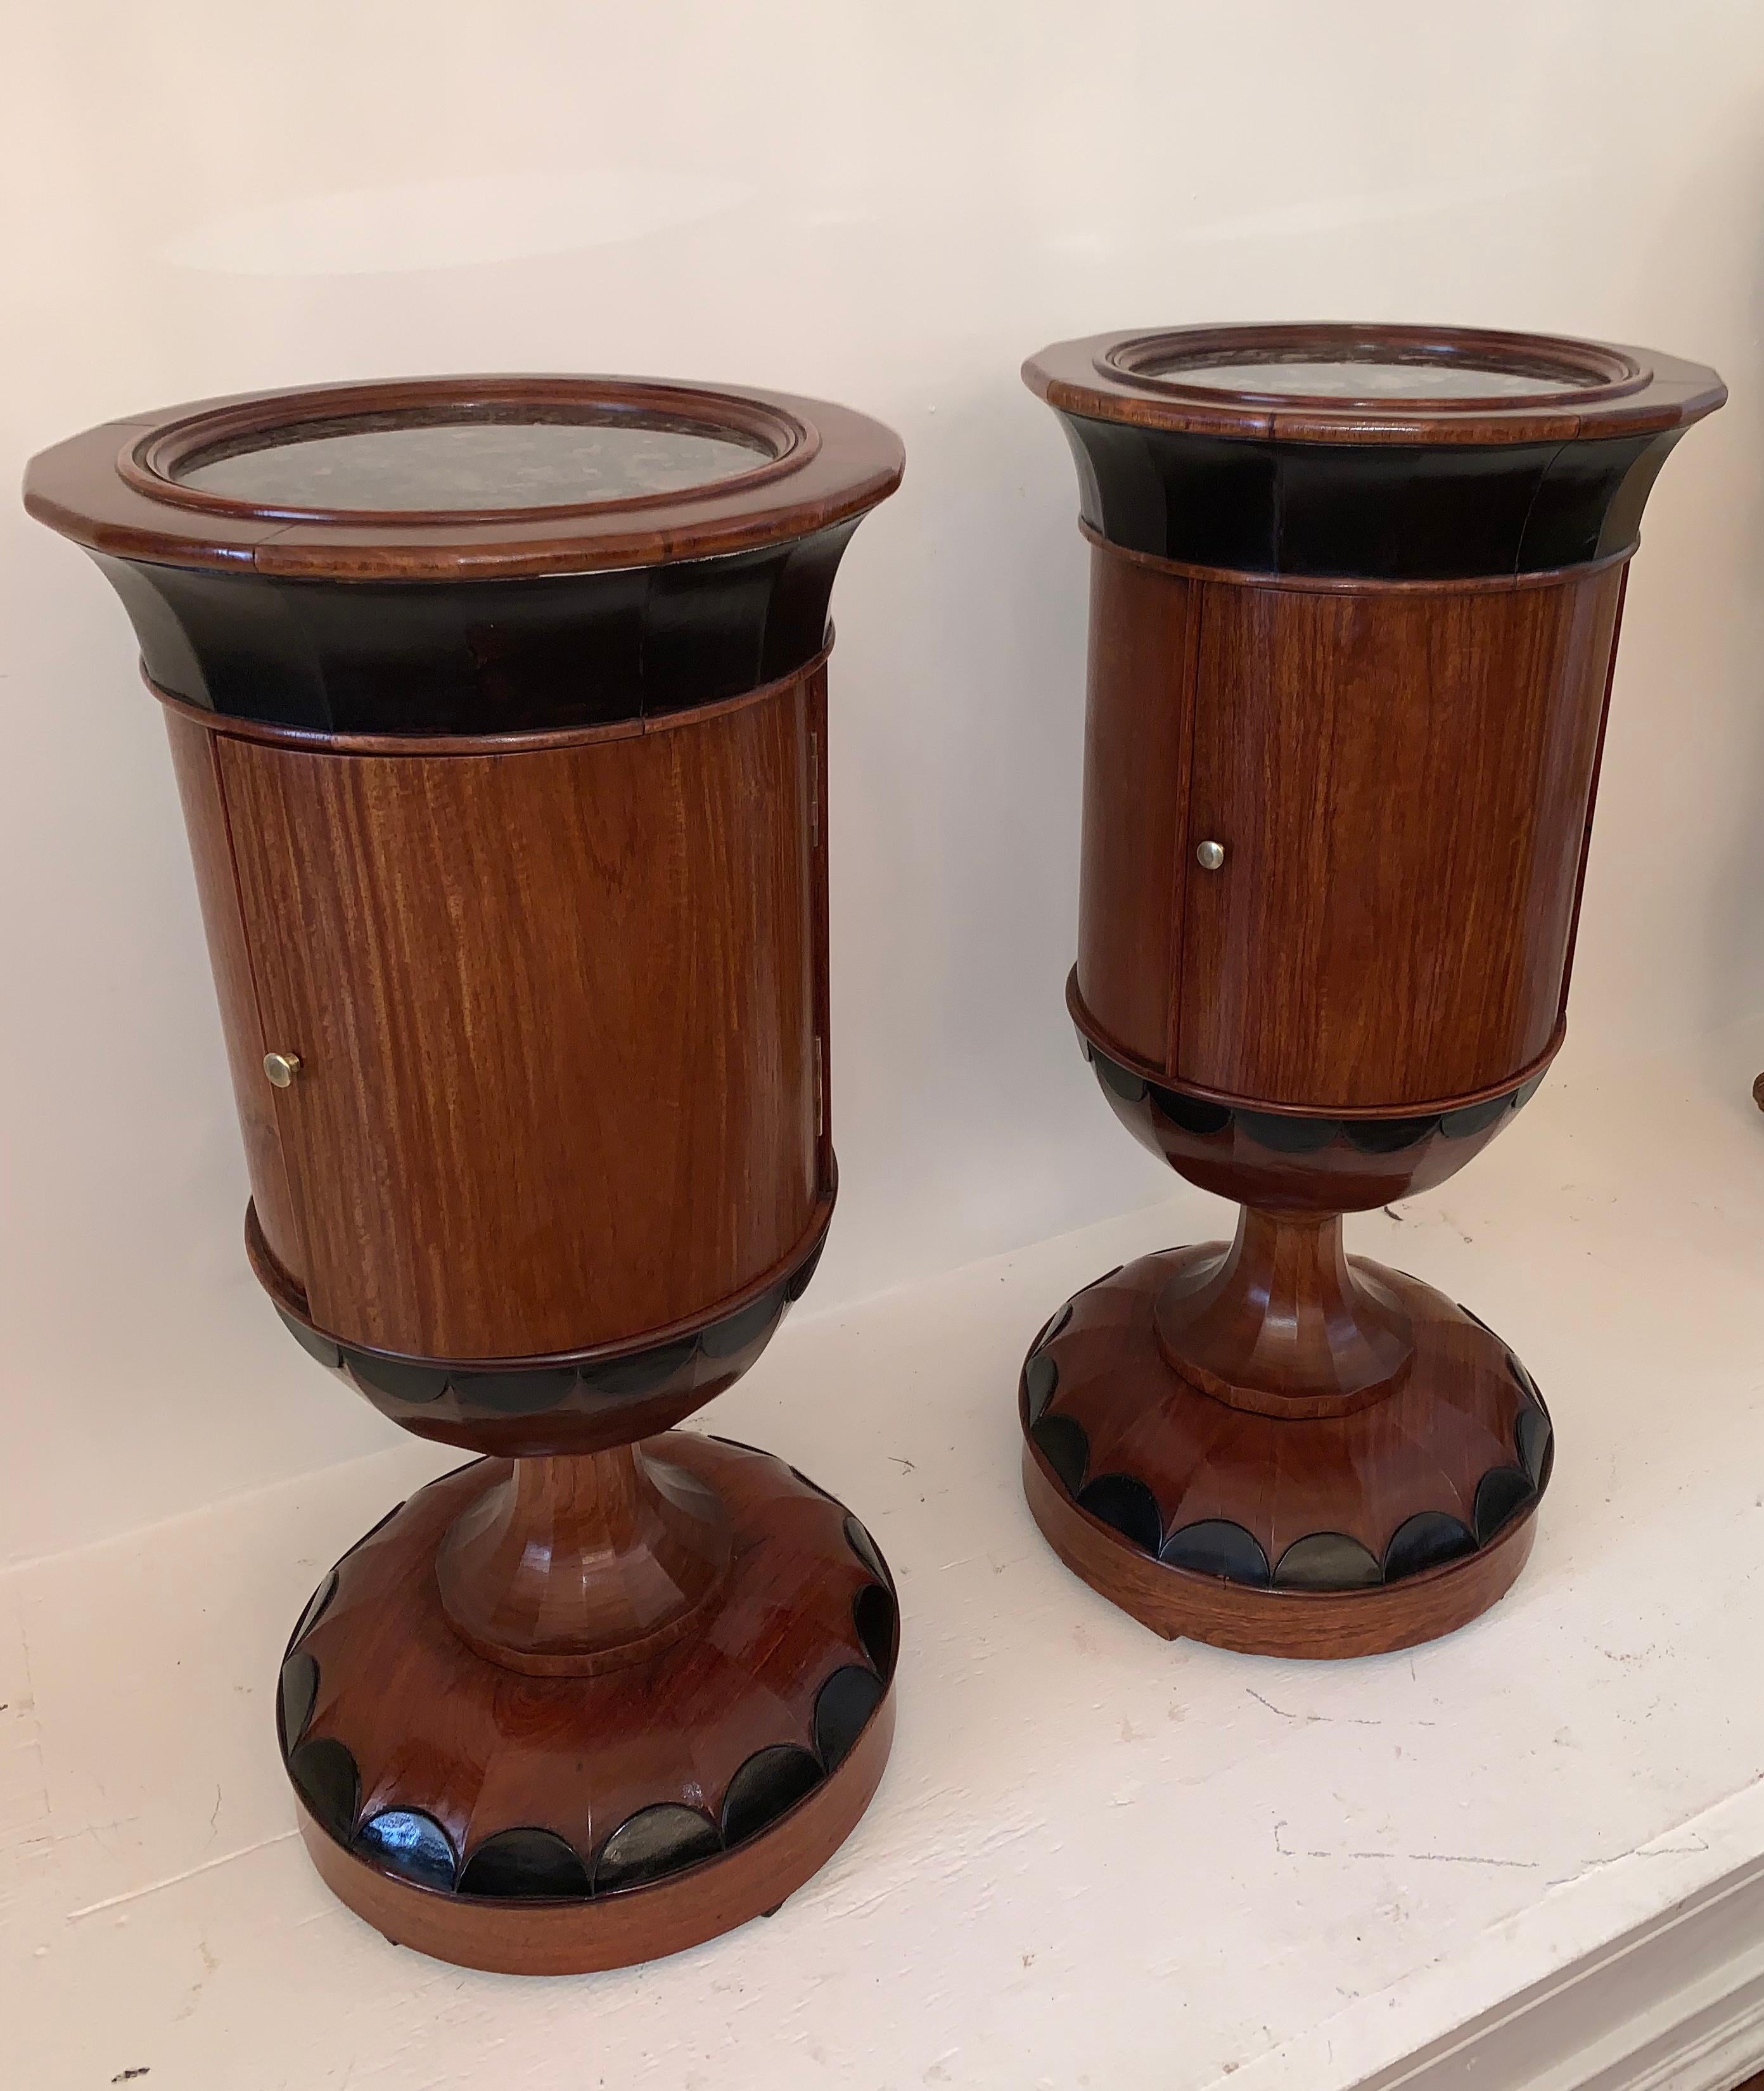 These unusual Biedermeier pedestals have a inset marble top. The column cabinets sit on a Hexadecagon that is highly figured veneer pedestal with ebonized highlights, creating a sophisticated contrast of color against the dark Walnut. The base, stem